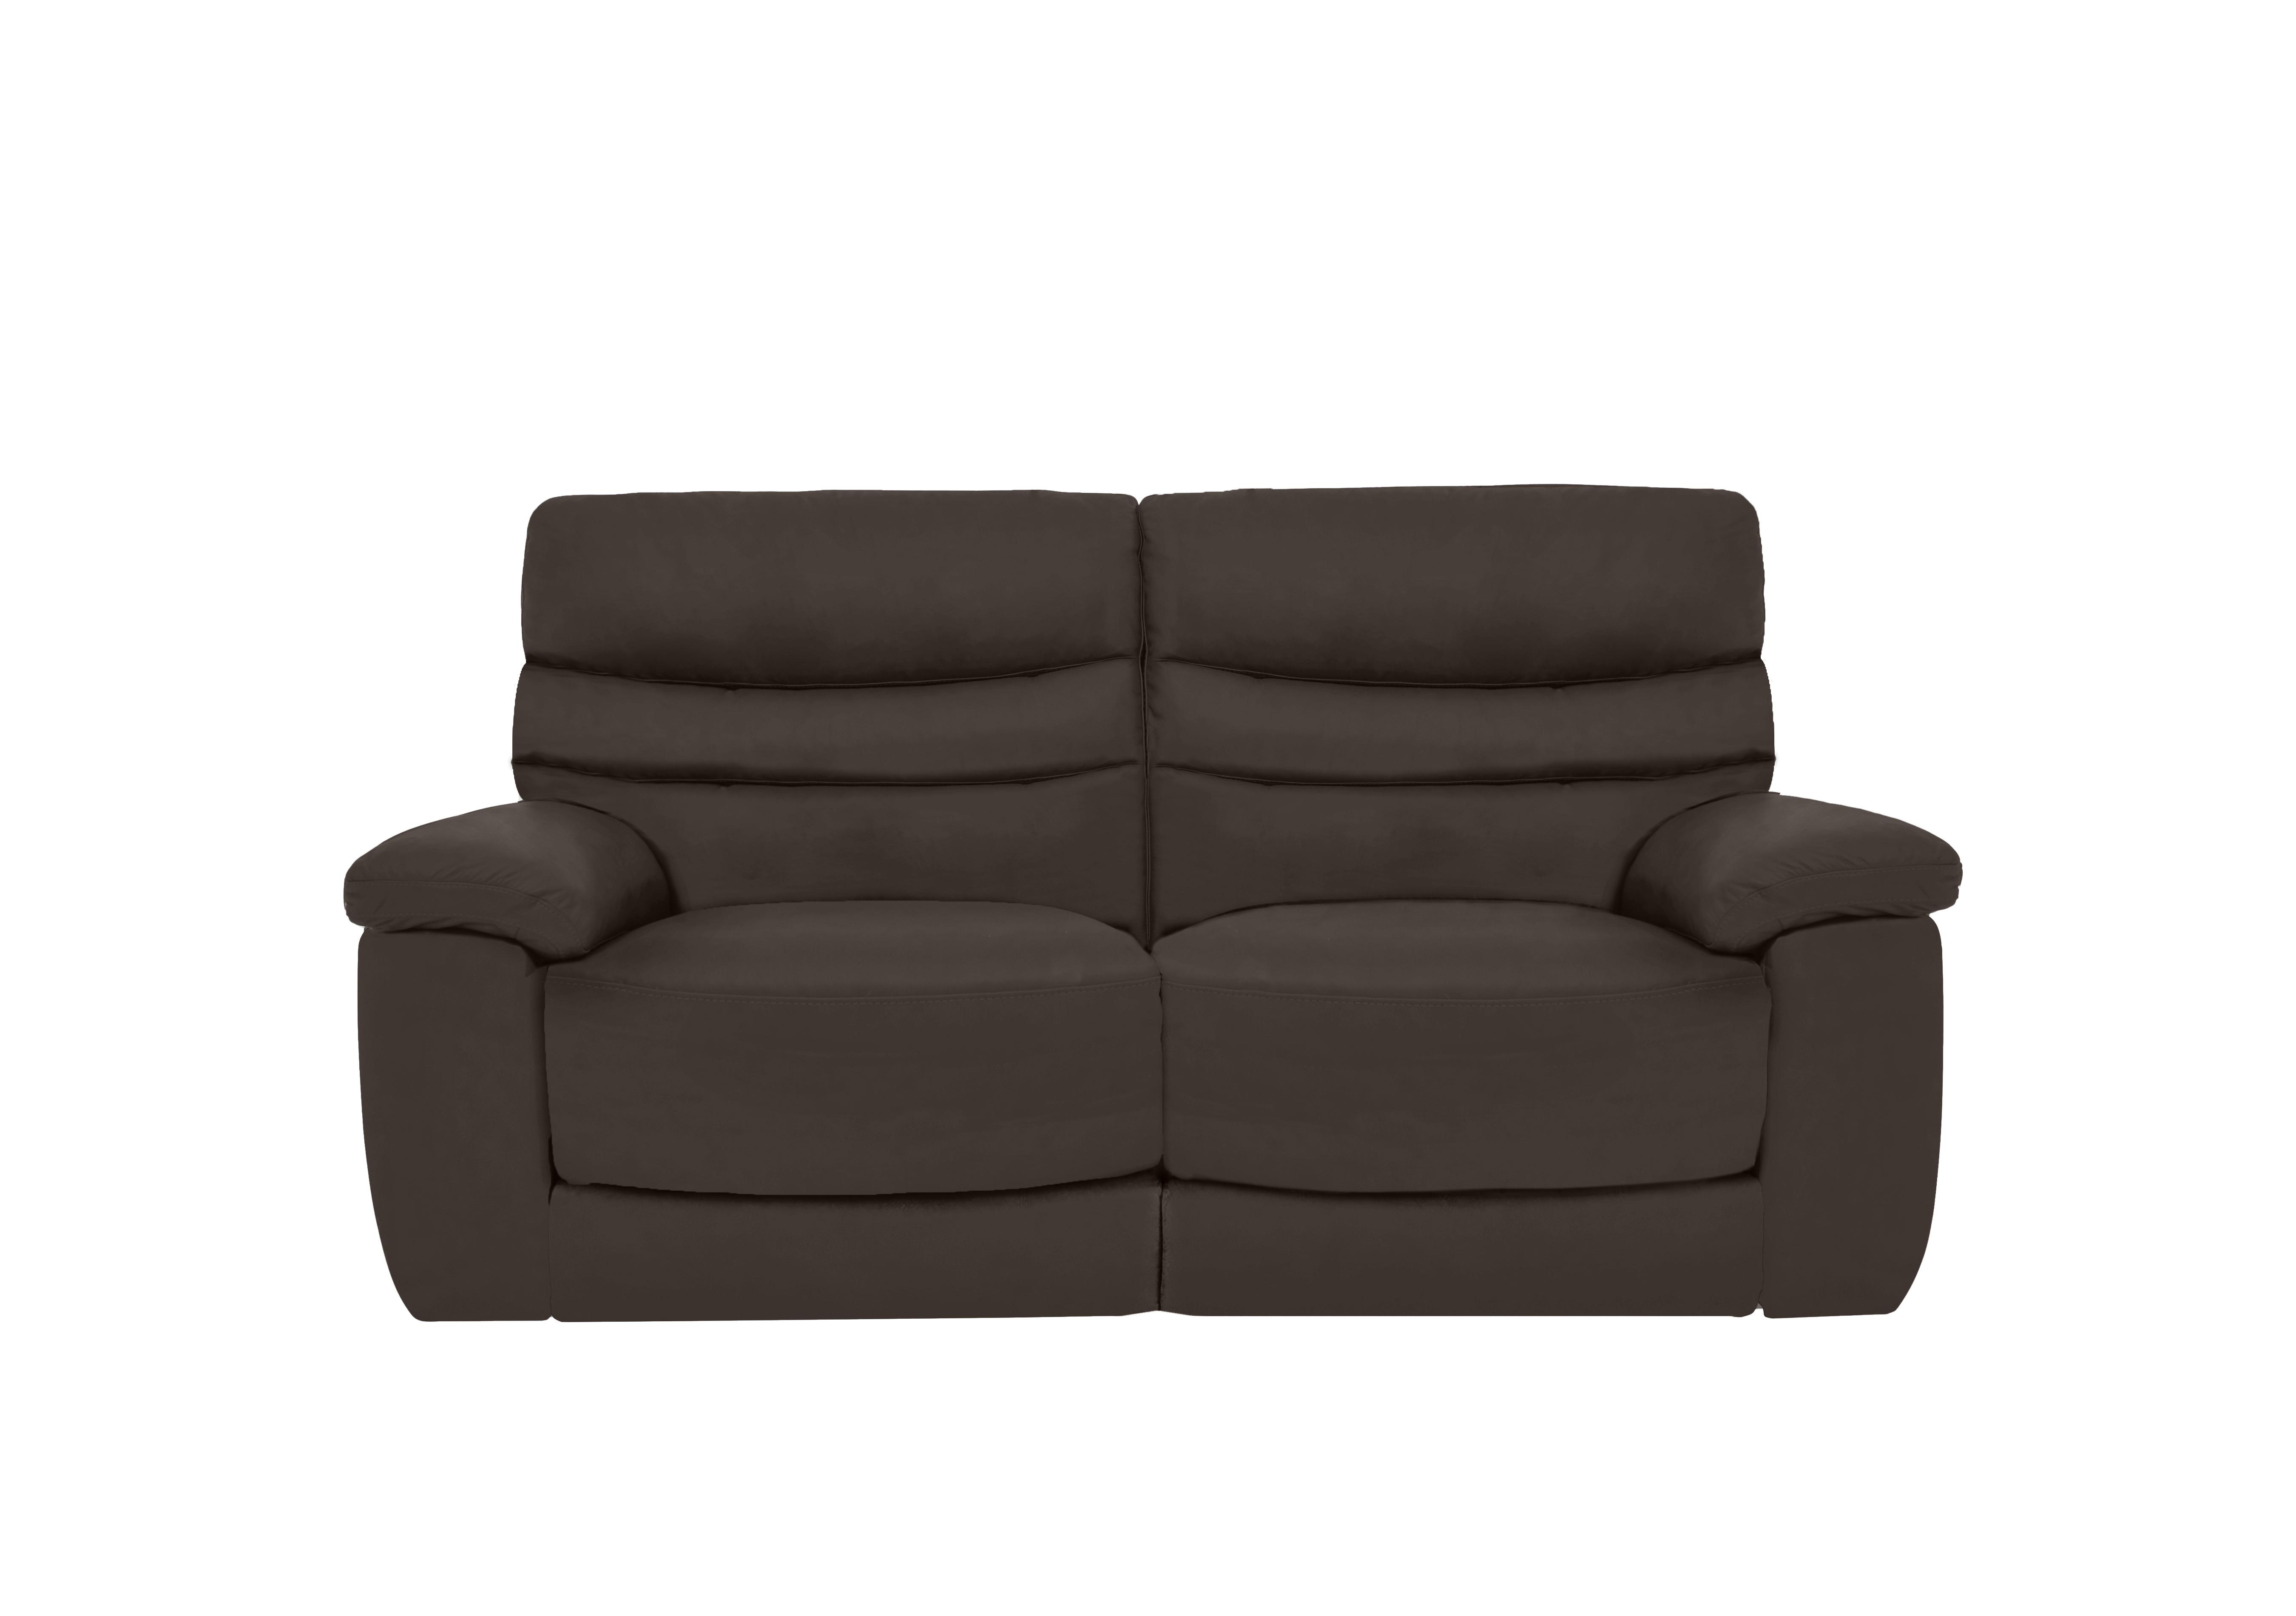 Nimbus 2 Seater Leather Power Recliner Sofa with Power Headrests and Power Lumbar in Bx-037c Walnut on Furniture Village